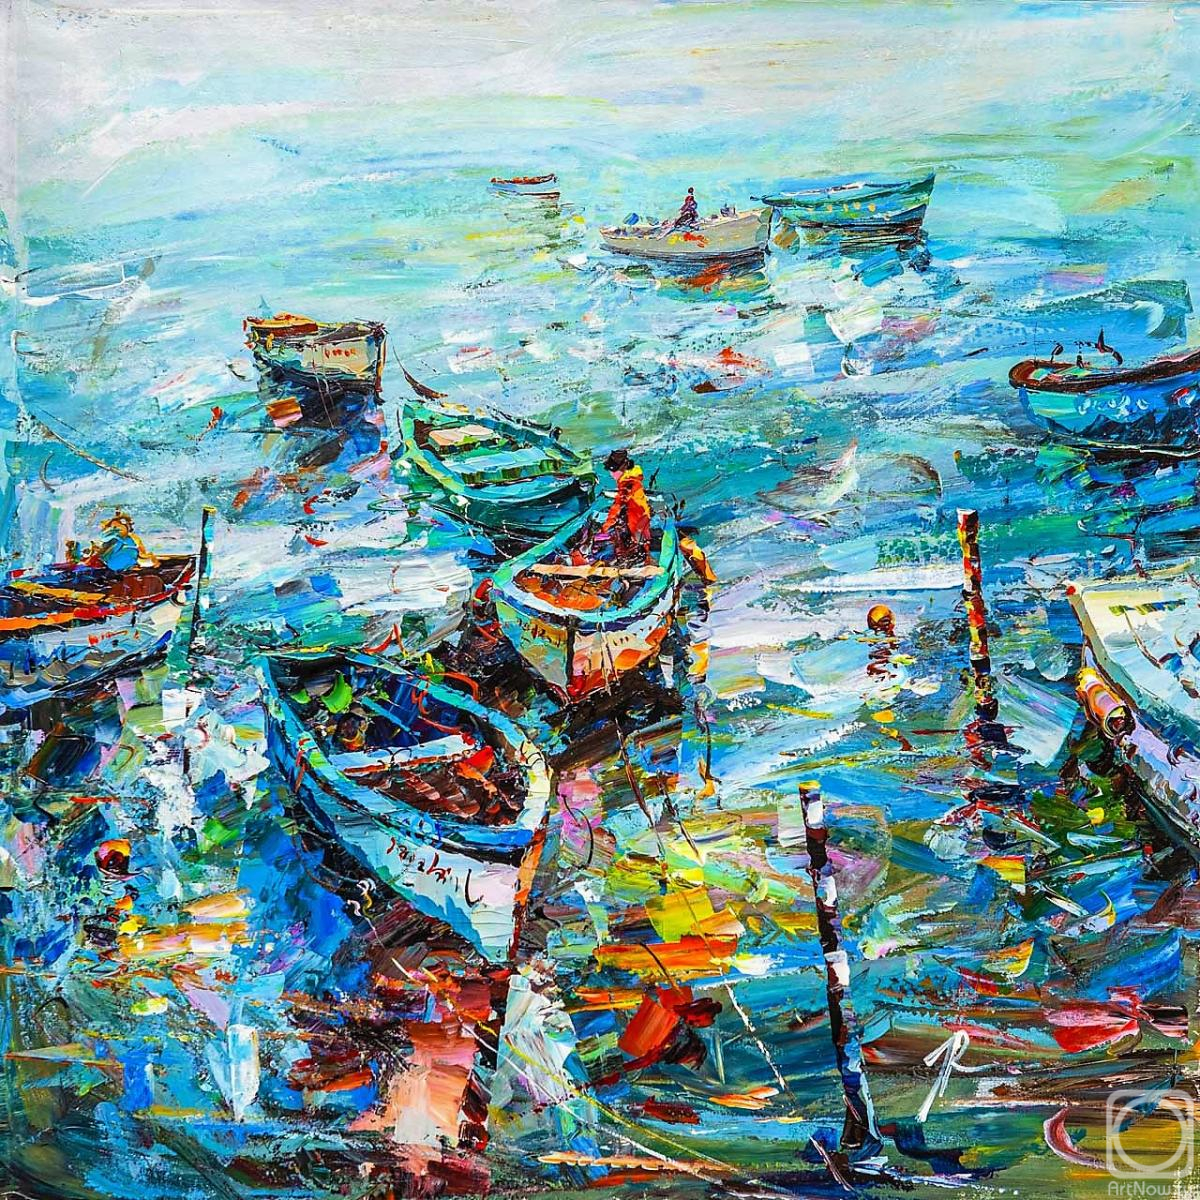 Rodries Jose. Fishing boats in the port